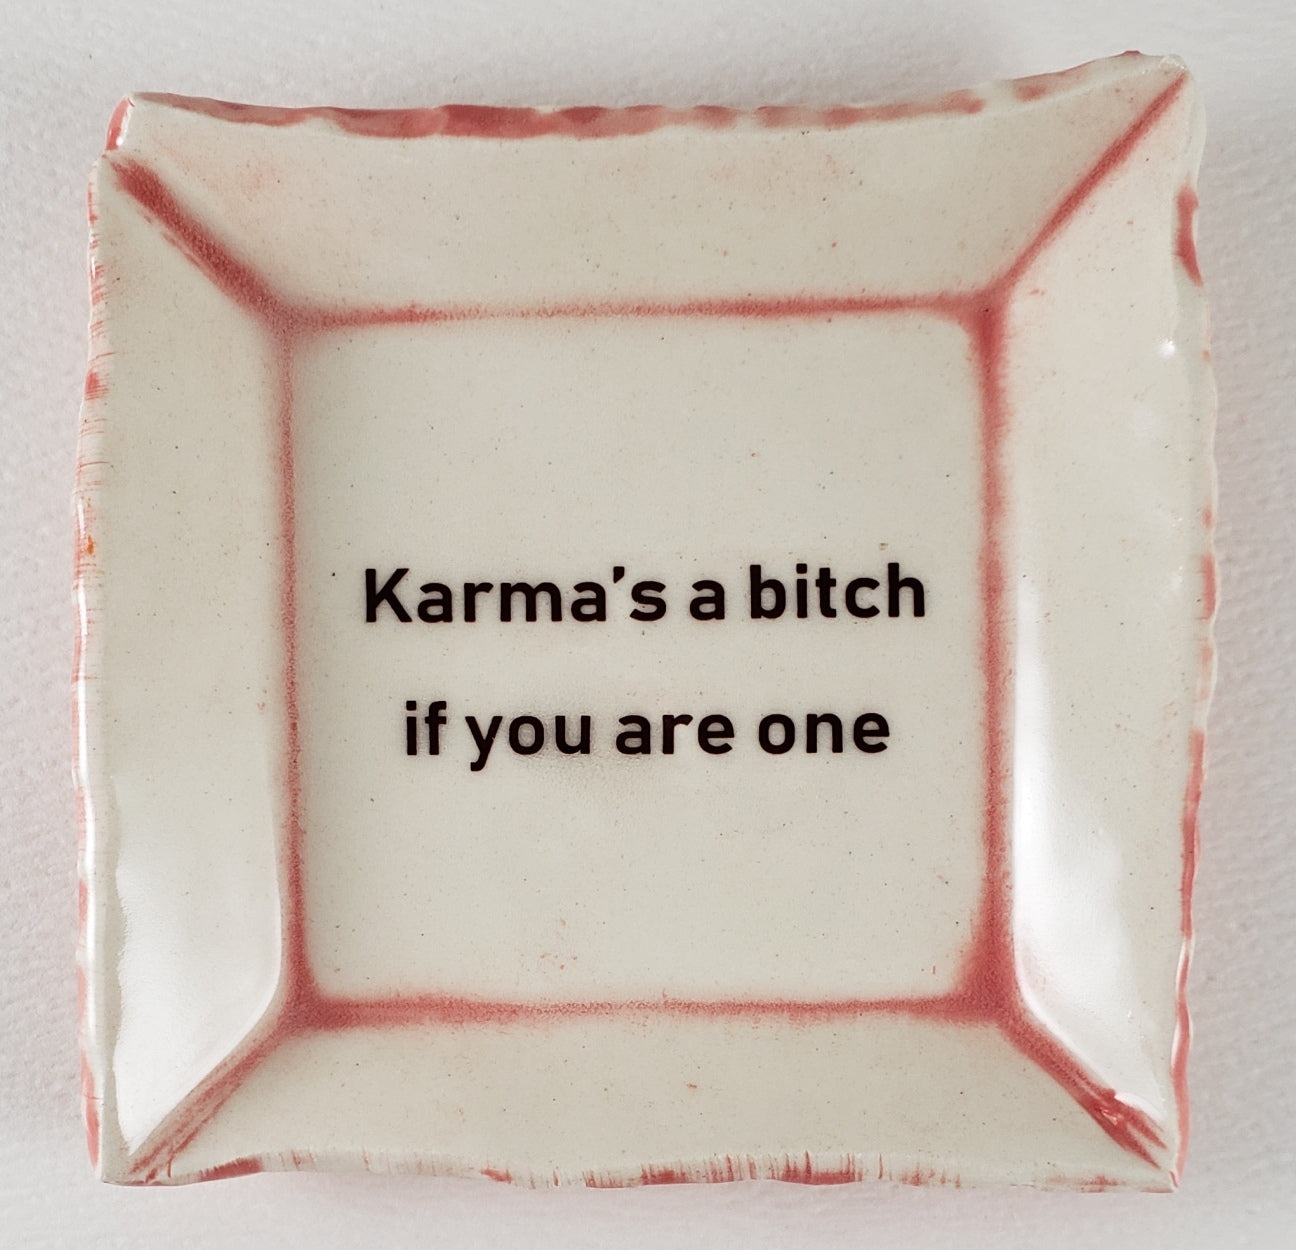 Tiny Plate with "Karma's a bitch if you are one"